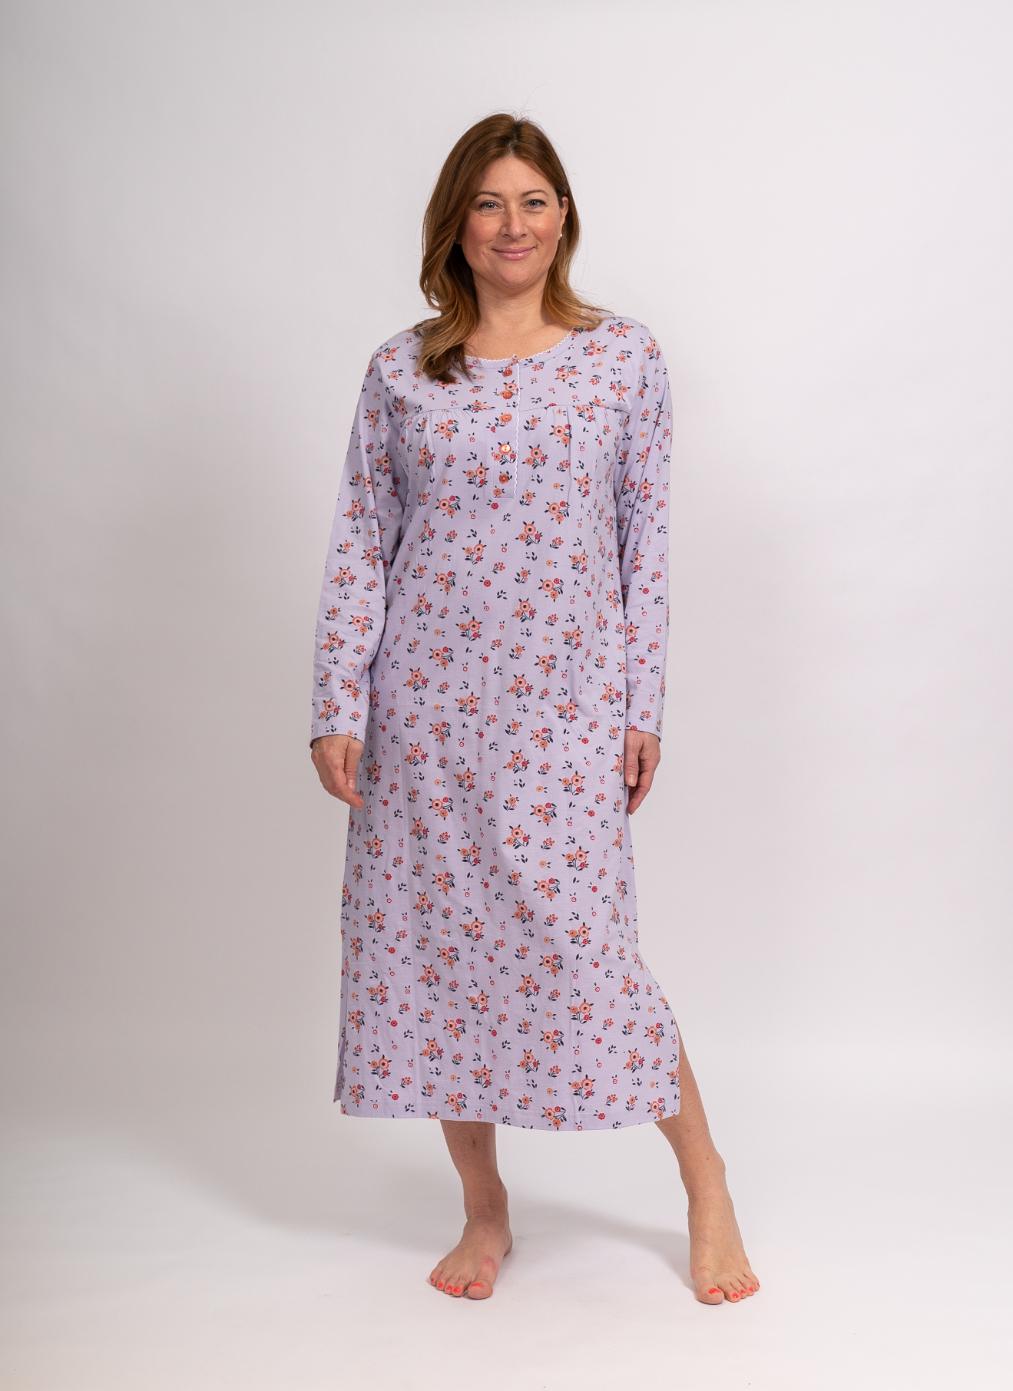 100% Cotton Nightgowns for Women